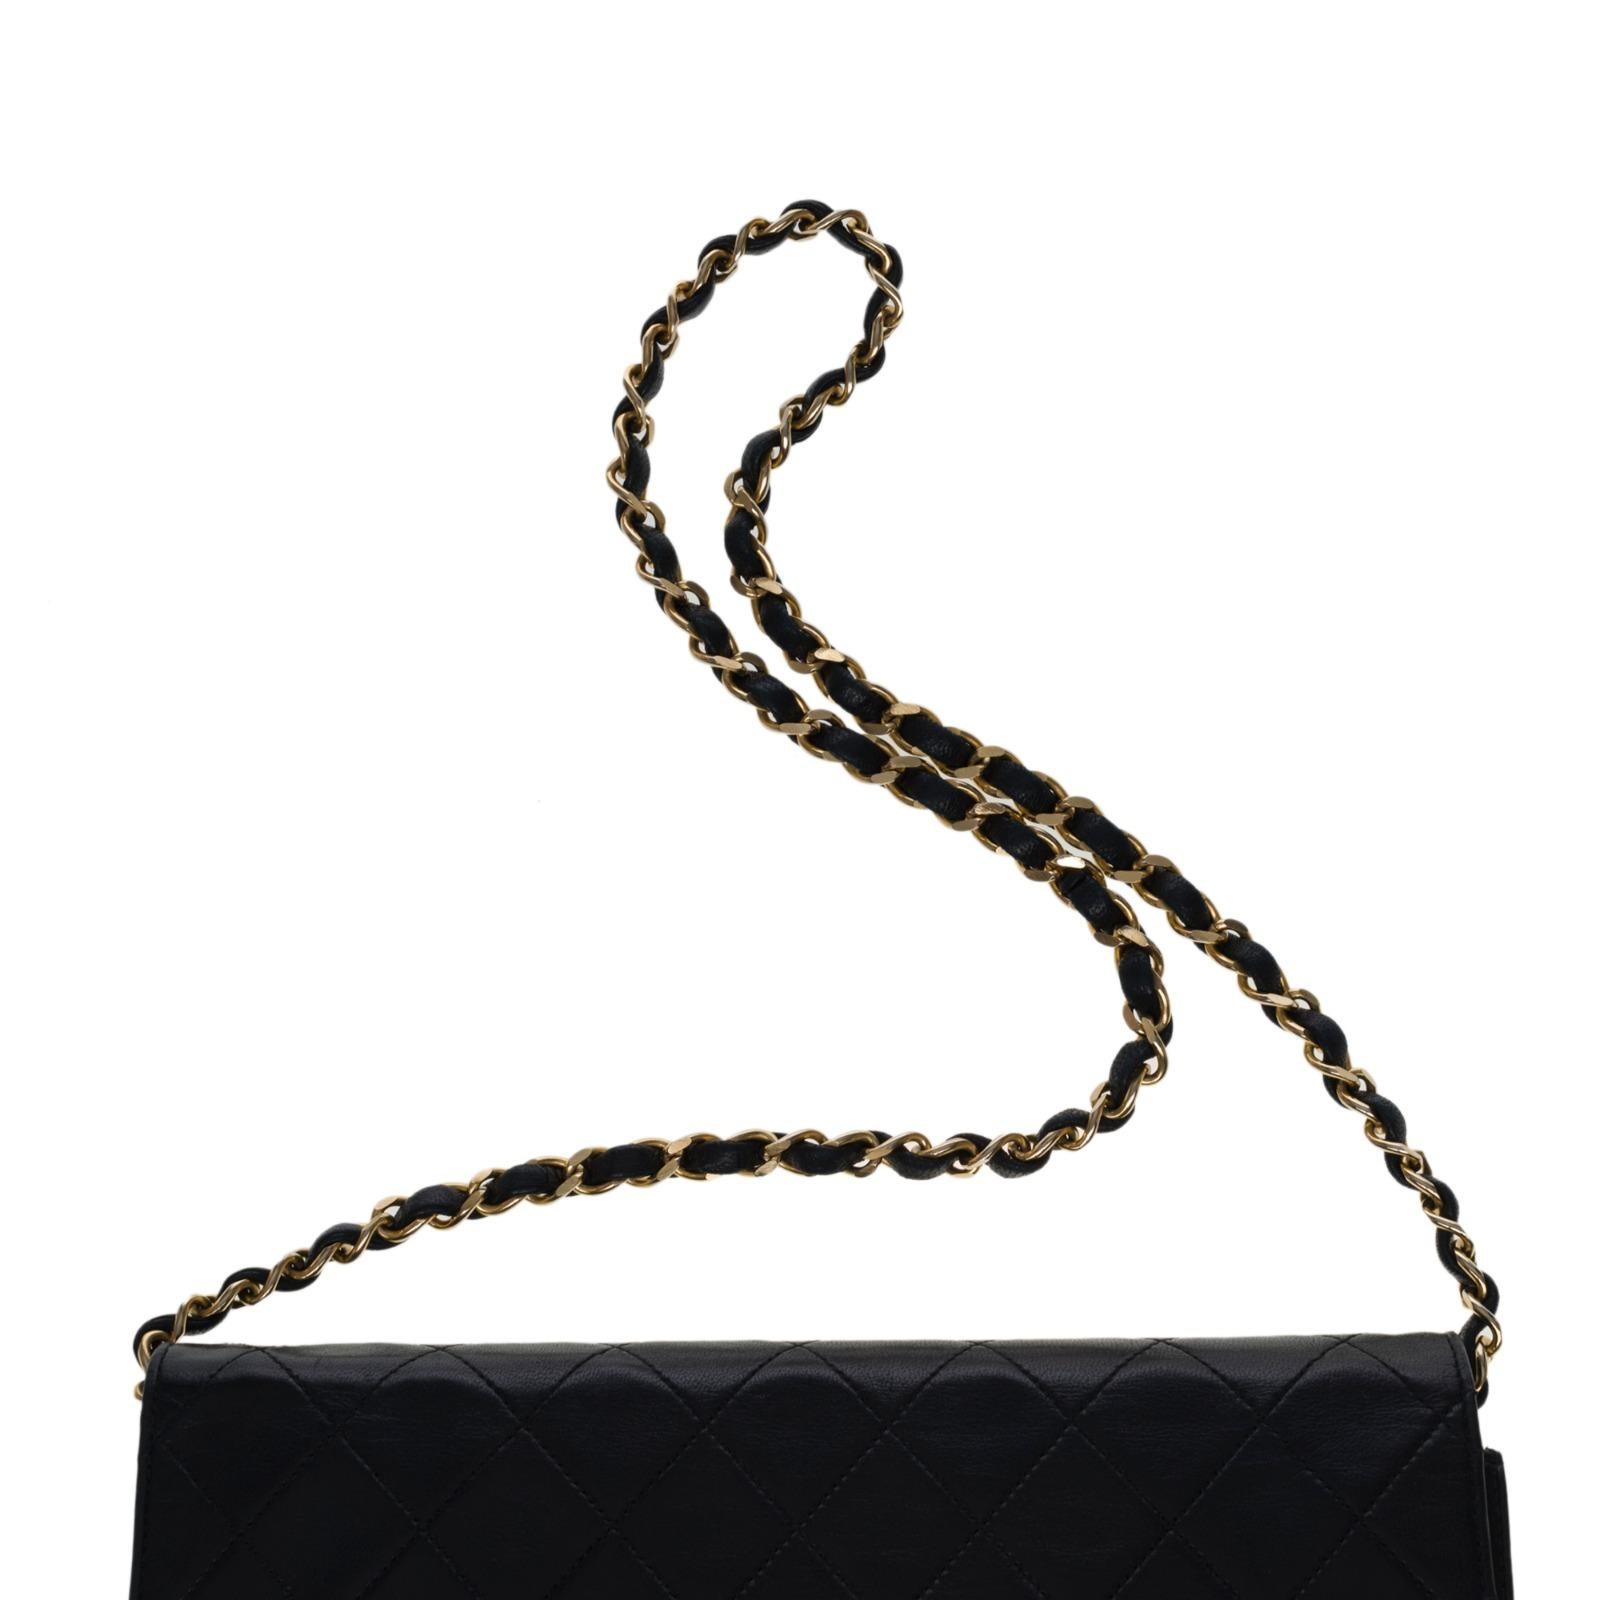 Chanel Classic Full Flap shoulder bag in black quilted lambskin leather, GHW 5